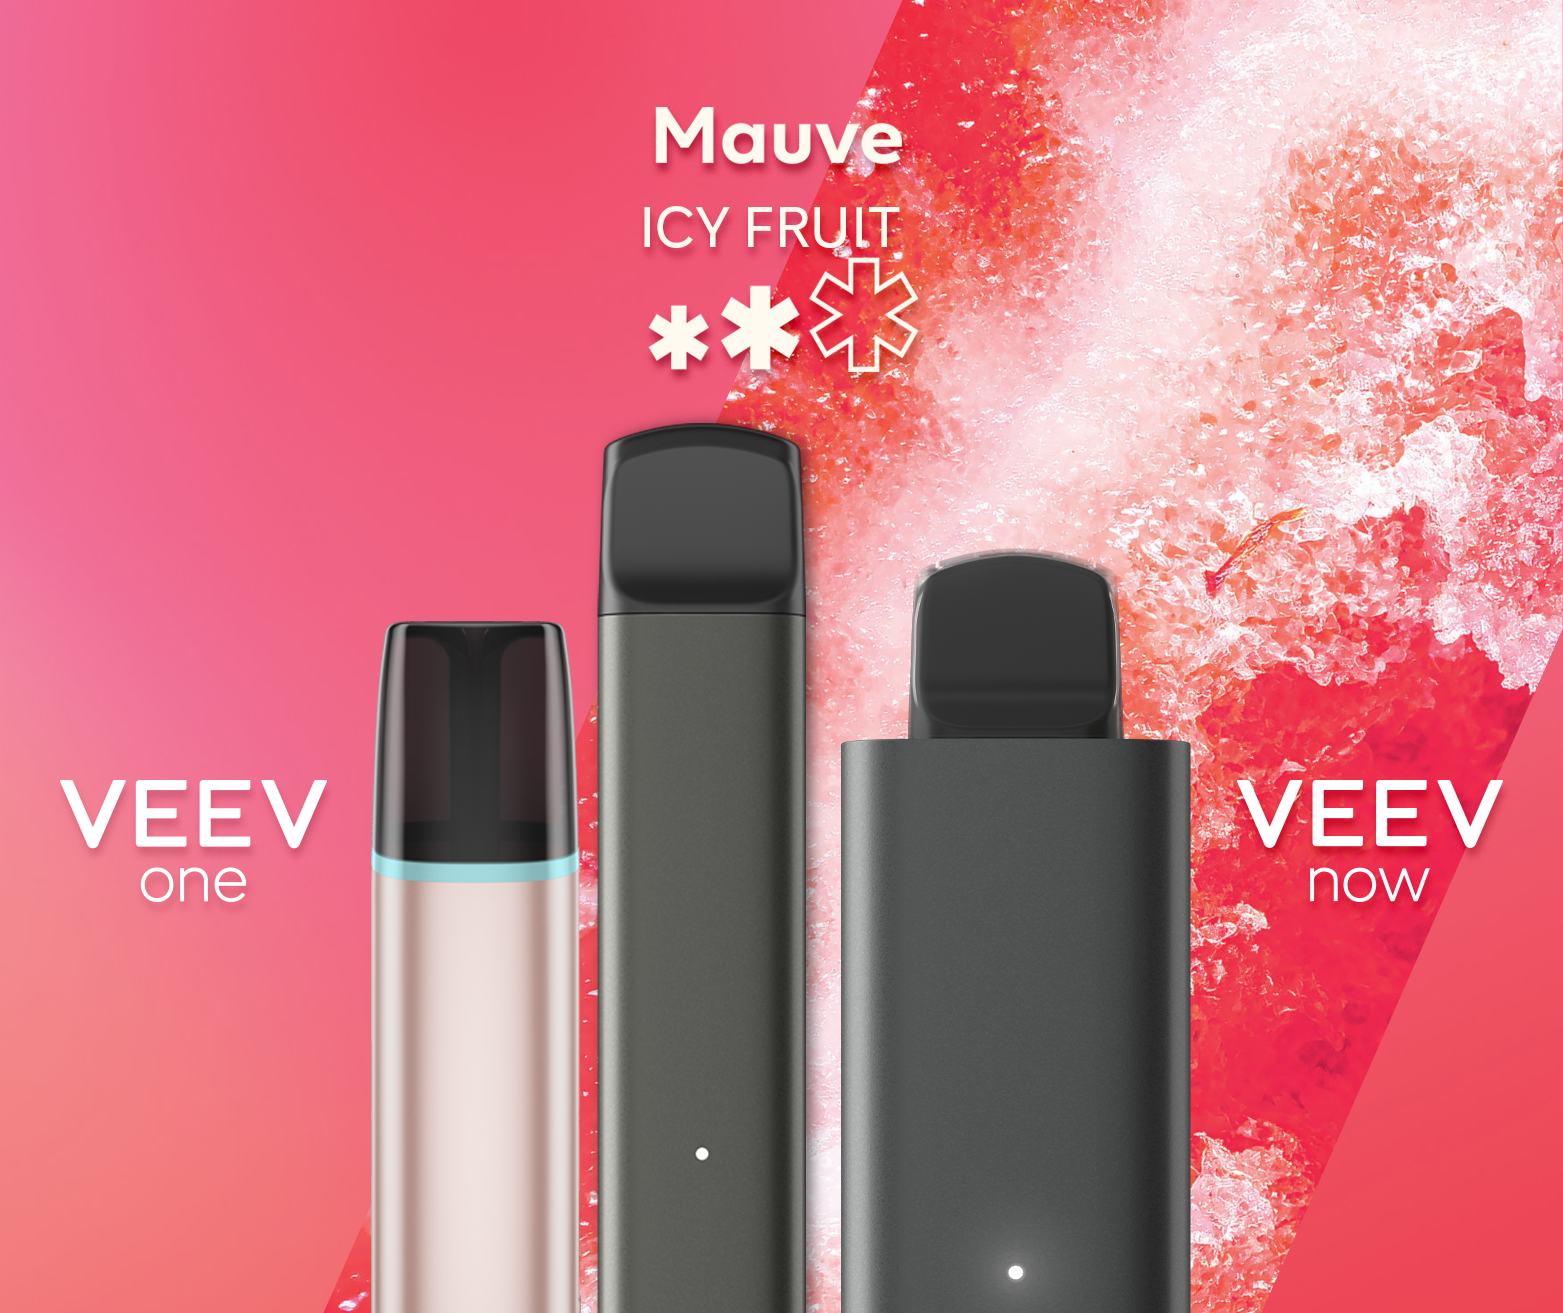 A VEEV ONE pod device and VEEV NOW disposable, both in Mauve flavour.